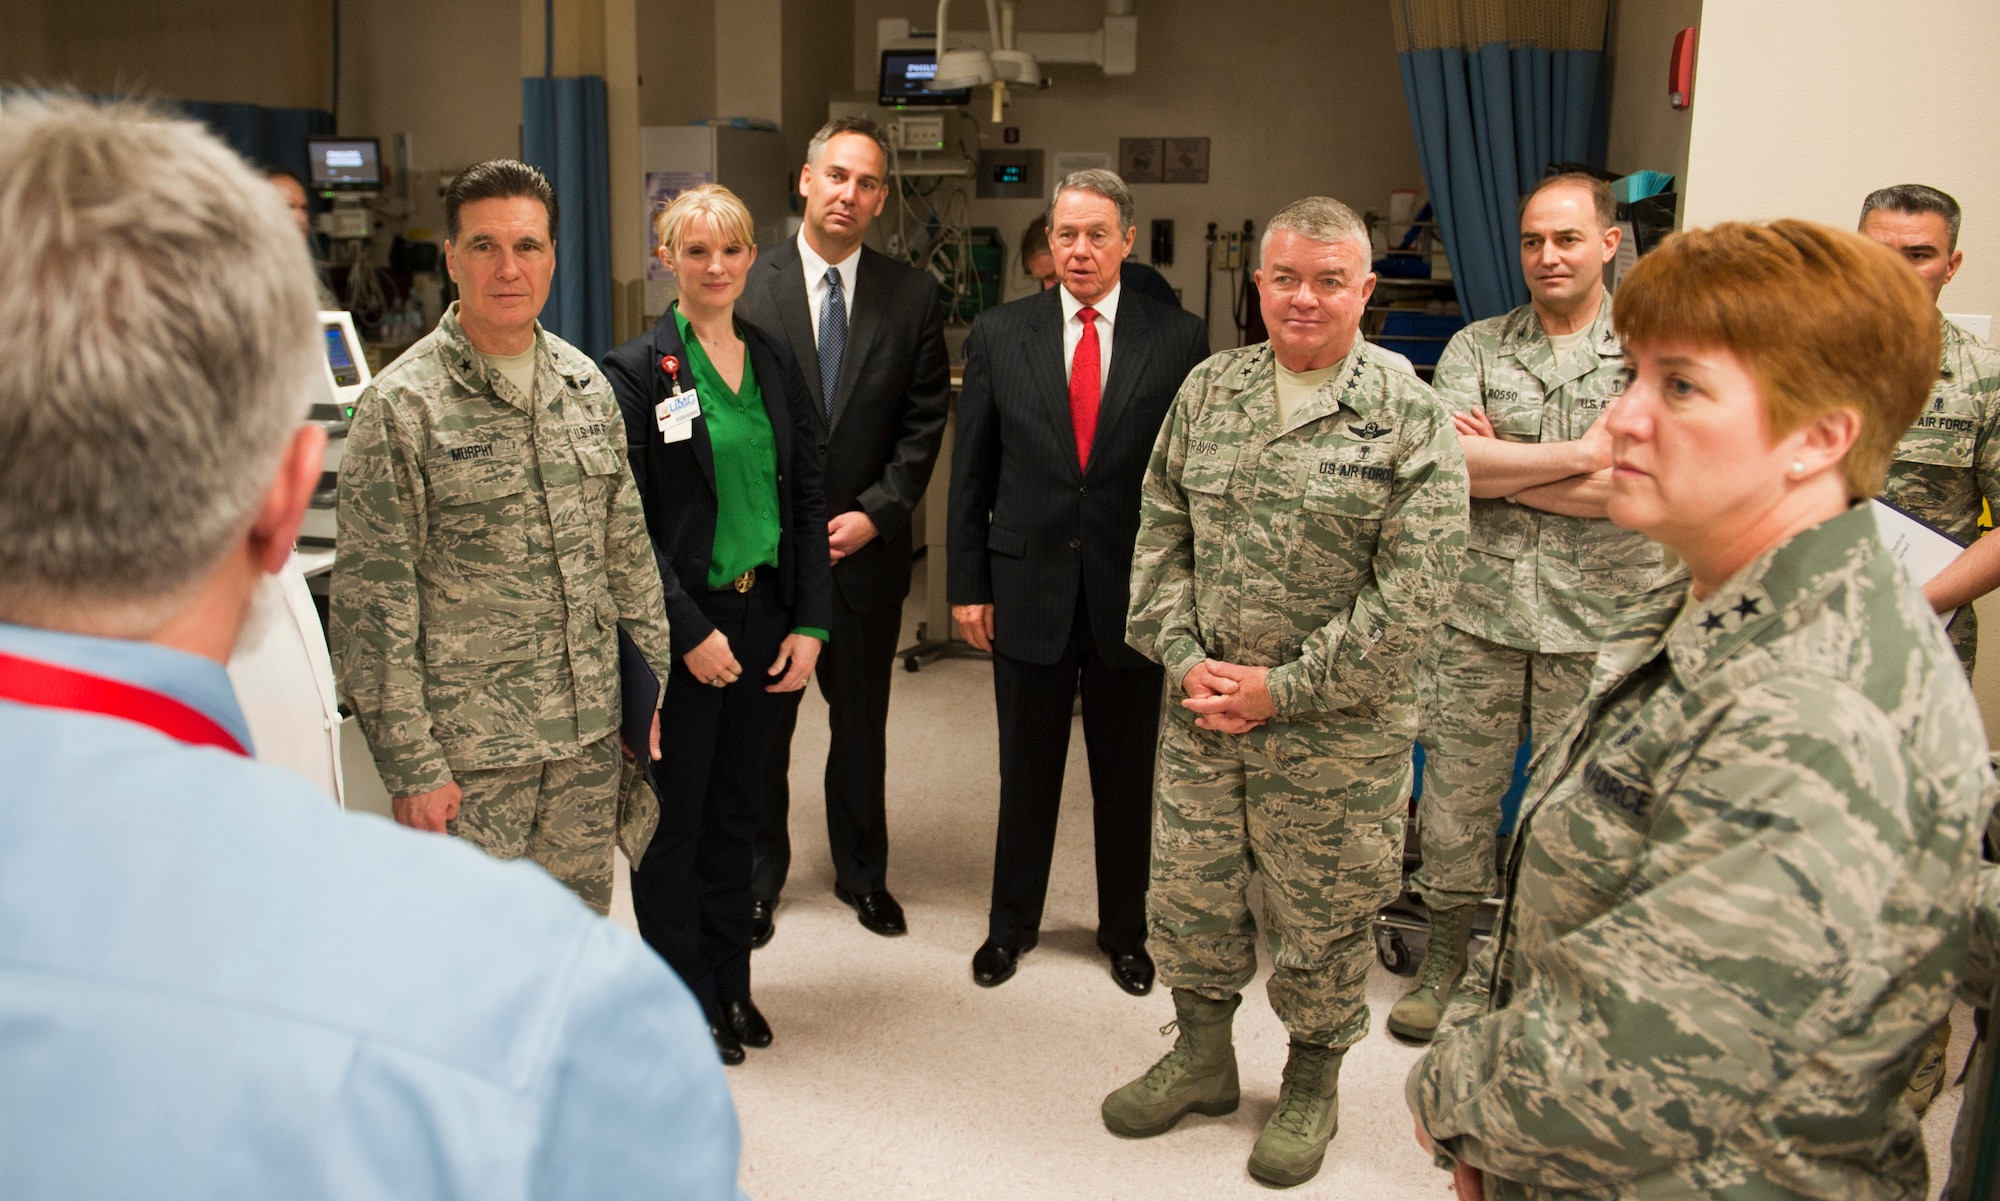 Brig. Gen. Sean Murphy (far left), Air Combat Command command surgeon, Lt. Gen. Thomas Travis (center), U.S. Air Force surgeon general and Maj. Gen. Dorothy Hogg (far right), U.S. Air Force director of medical operations and research and chief of the nurse corps, listen to an overview of the University Medical Center of Southern Nevada emergency room during a tour of the hospital in Las Vegas, Nev., Jan. 13, 2015. Travis, Hogg and Murphy were visiting UMC to learn about the benefits of the Sustained Medical and Readiness Trained, or SMART, program. The program is designed to give physicians, nurses and medical technicians the opportunity that they would not receive in a Military Treatment Facility to refine their skills. (U.S. Air Force photo by Senior Airman Thomas Spangler)